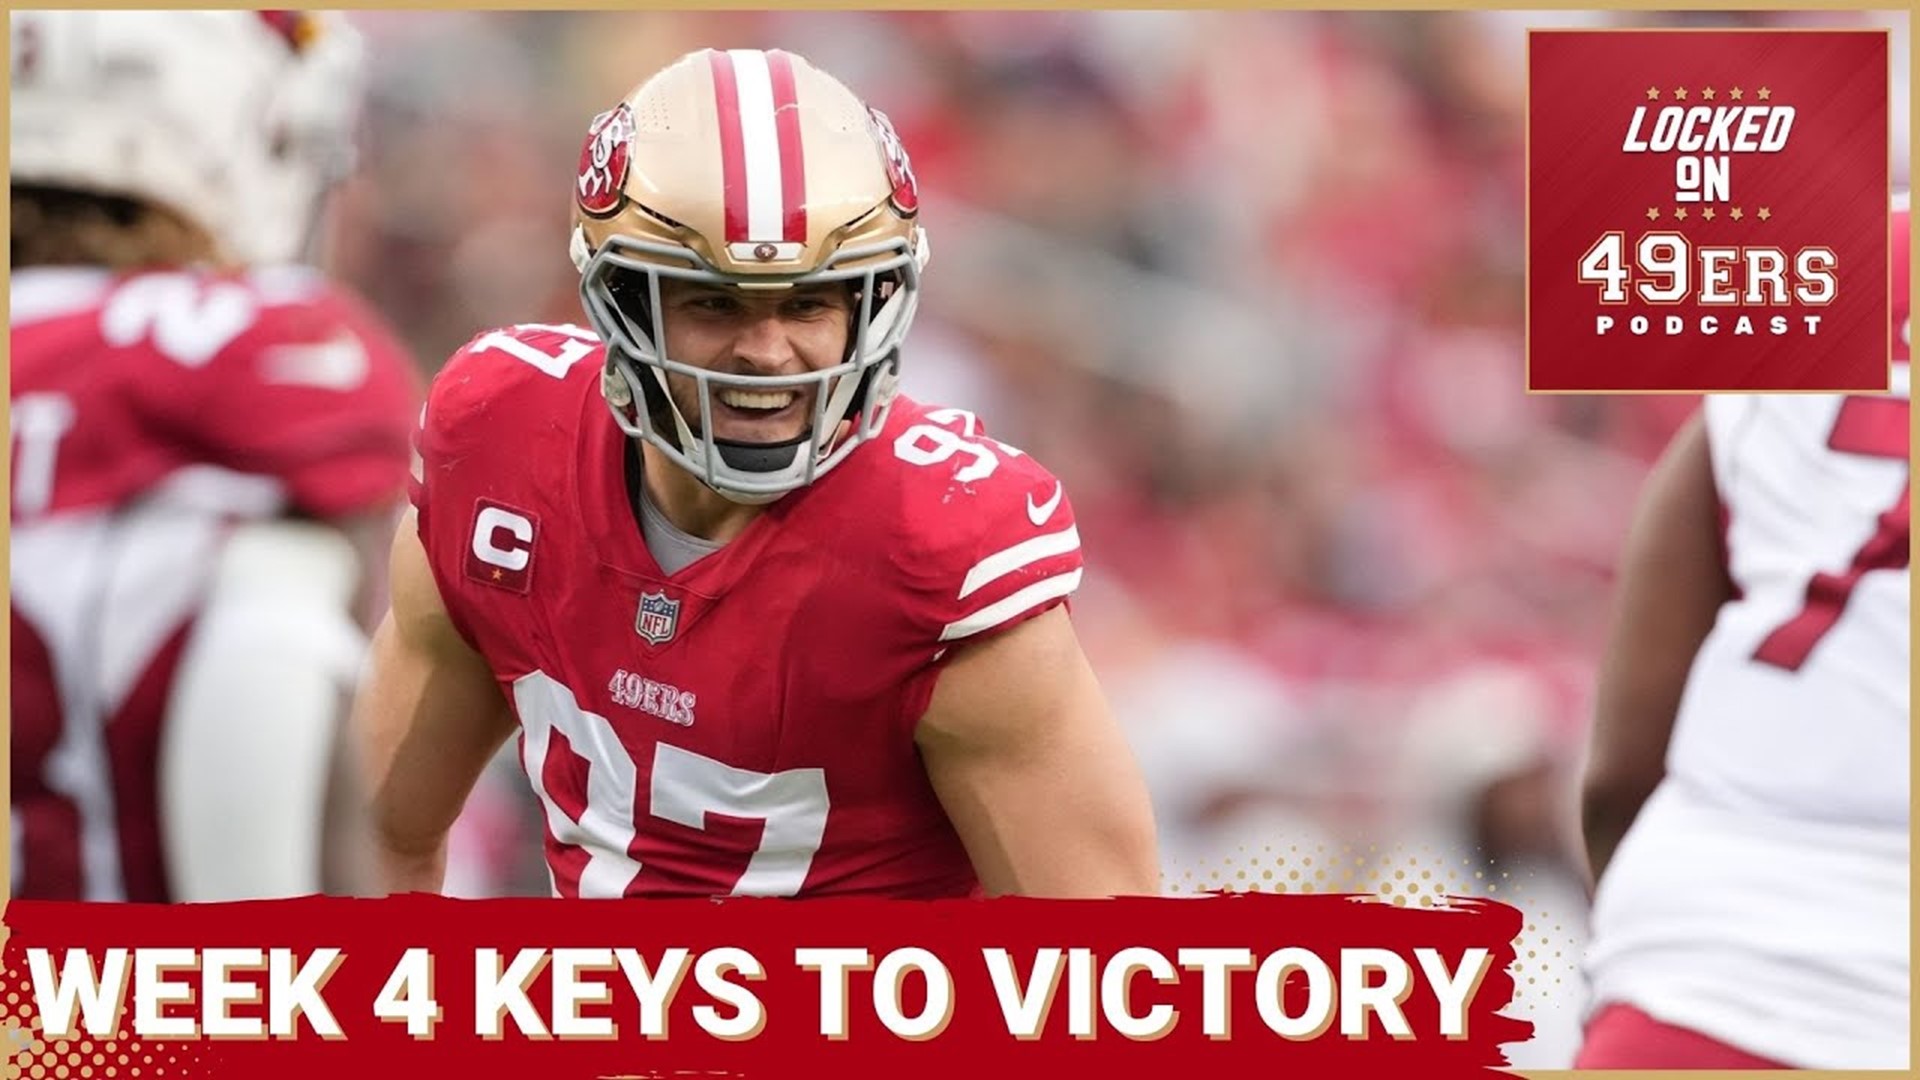 McCaffrey scores 4 TDs to lead the 49ers past the Cardinals